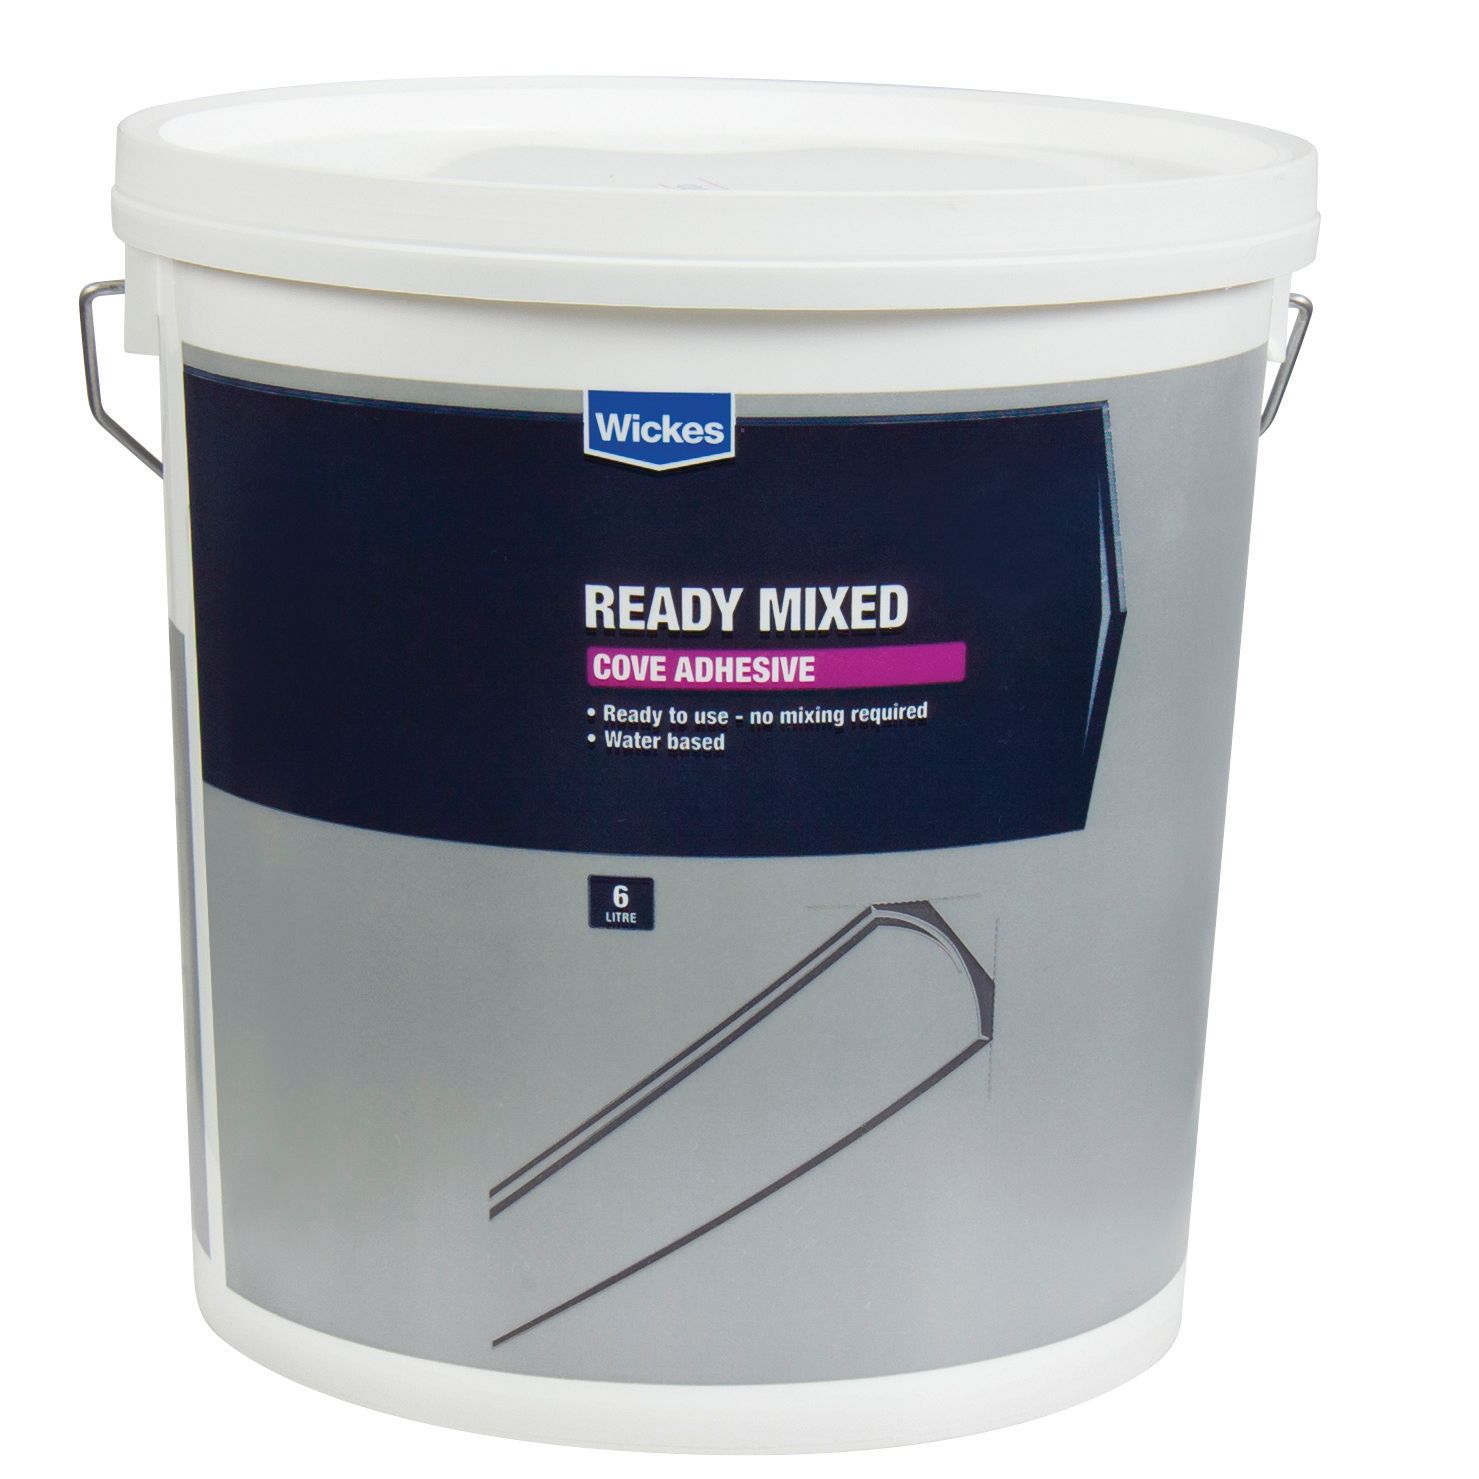 Image of Wickes Ready Mixed Coving Adhesive 6L